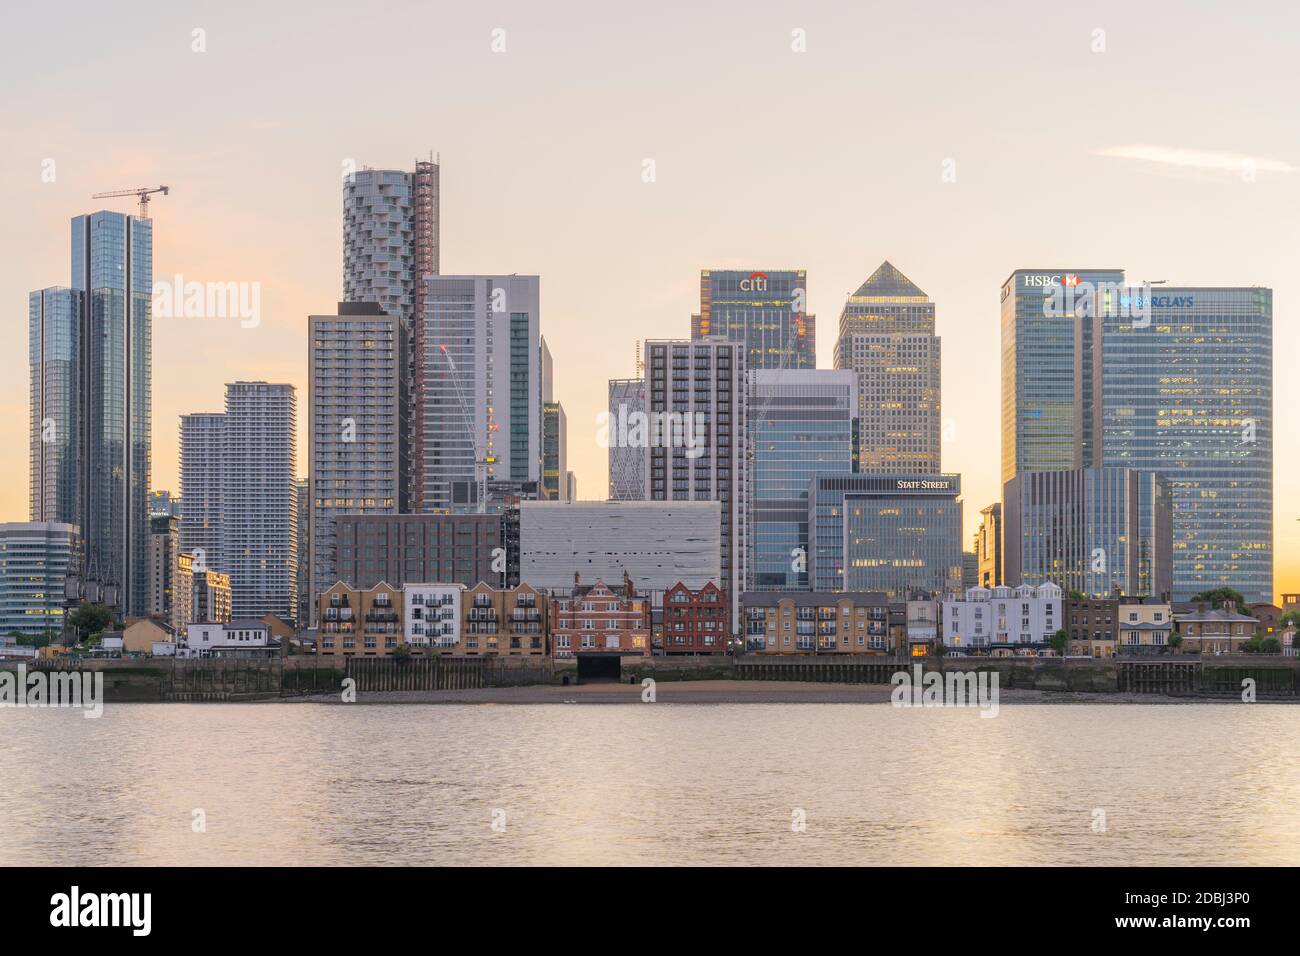 Canary Wharf and the River Thames, Docklands, London, England, United Kingdom, Europe Stock Photo